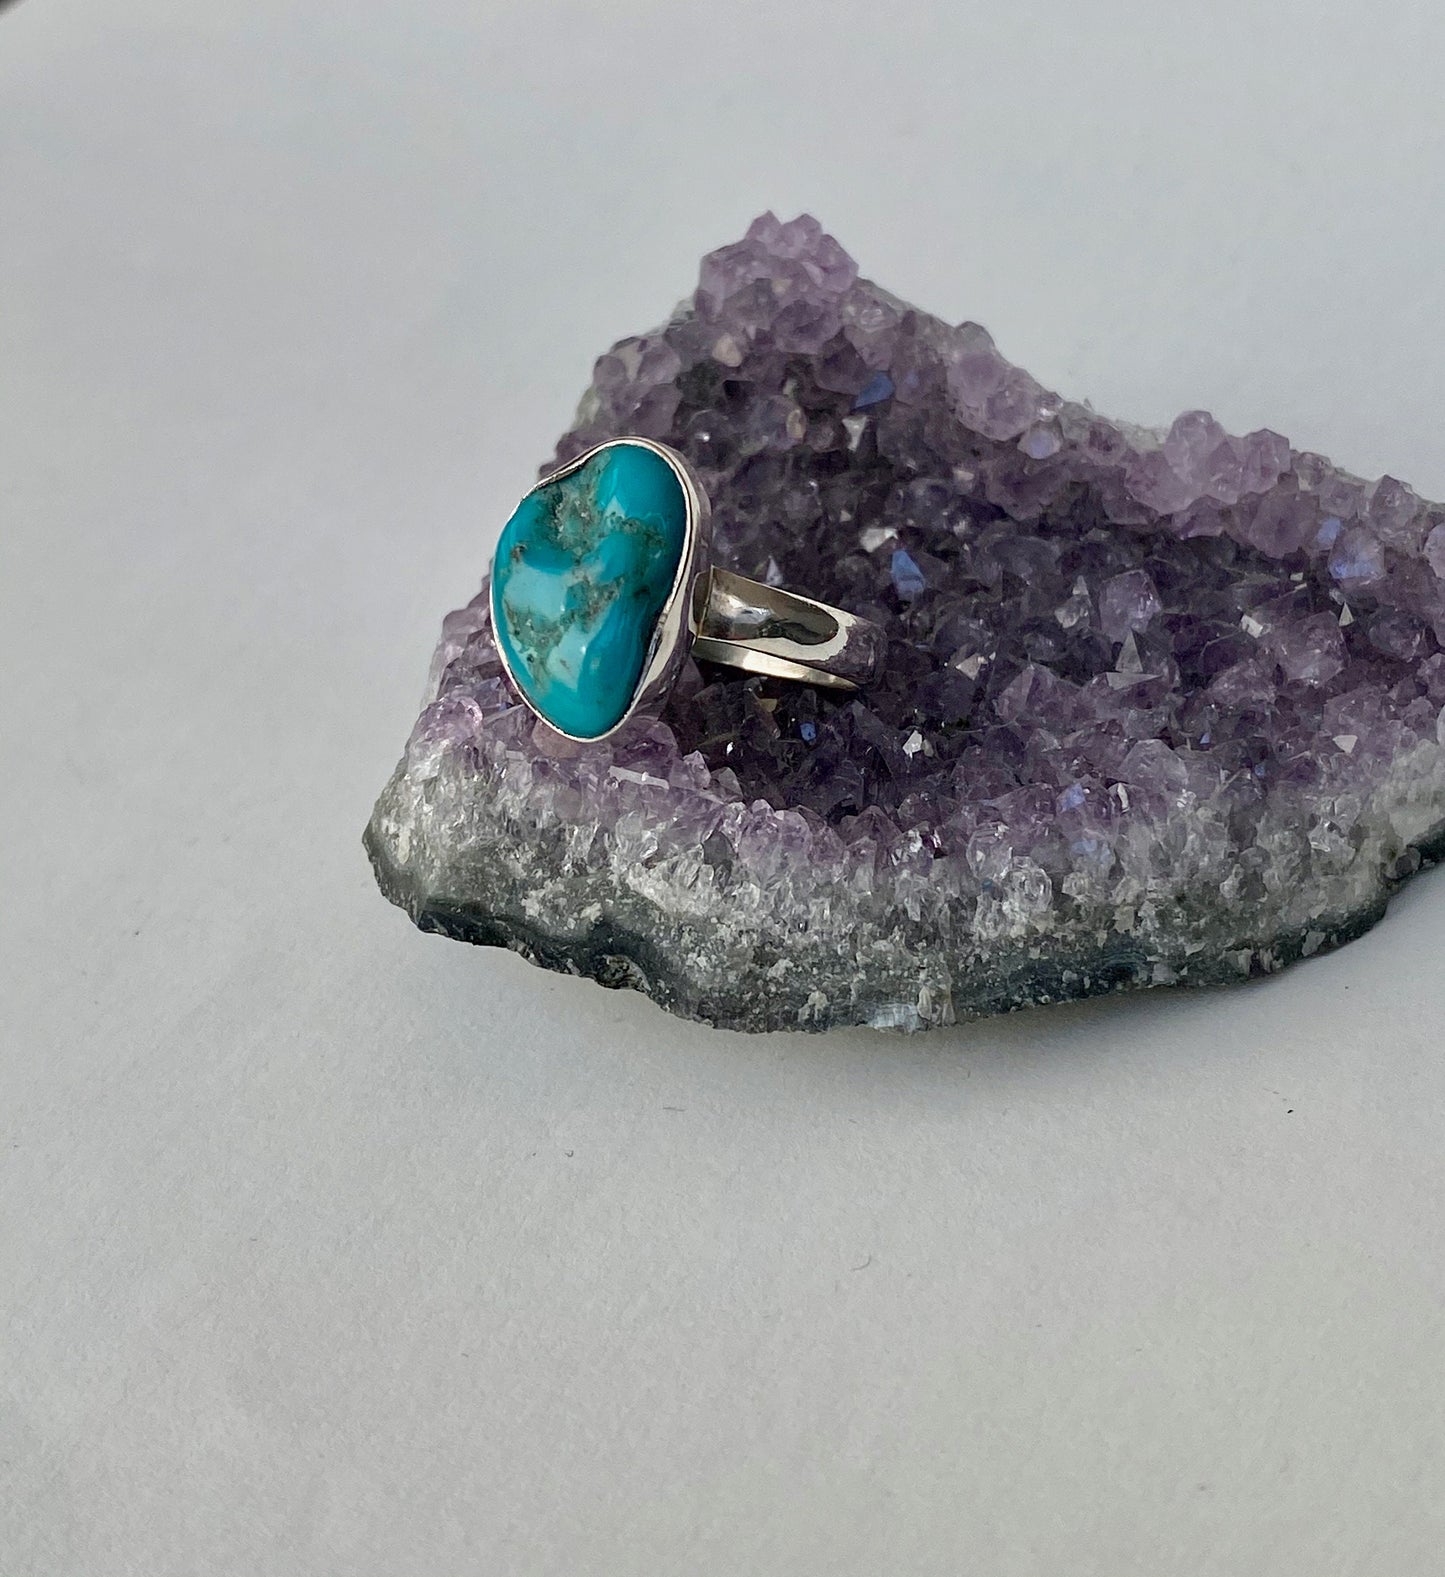 Handmade size 9 turquoise and sterling silver ring.